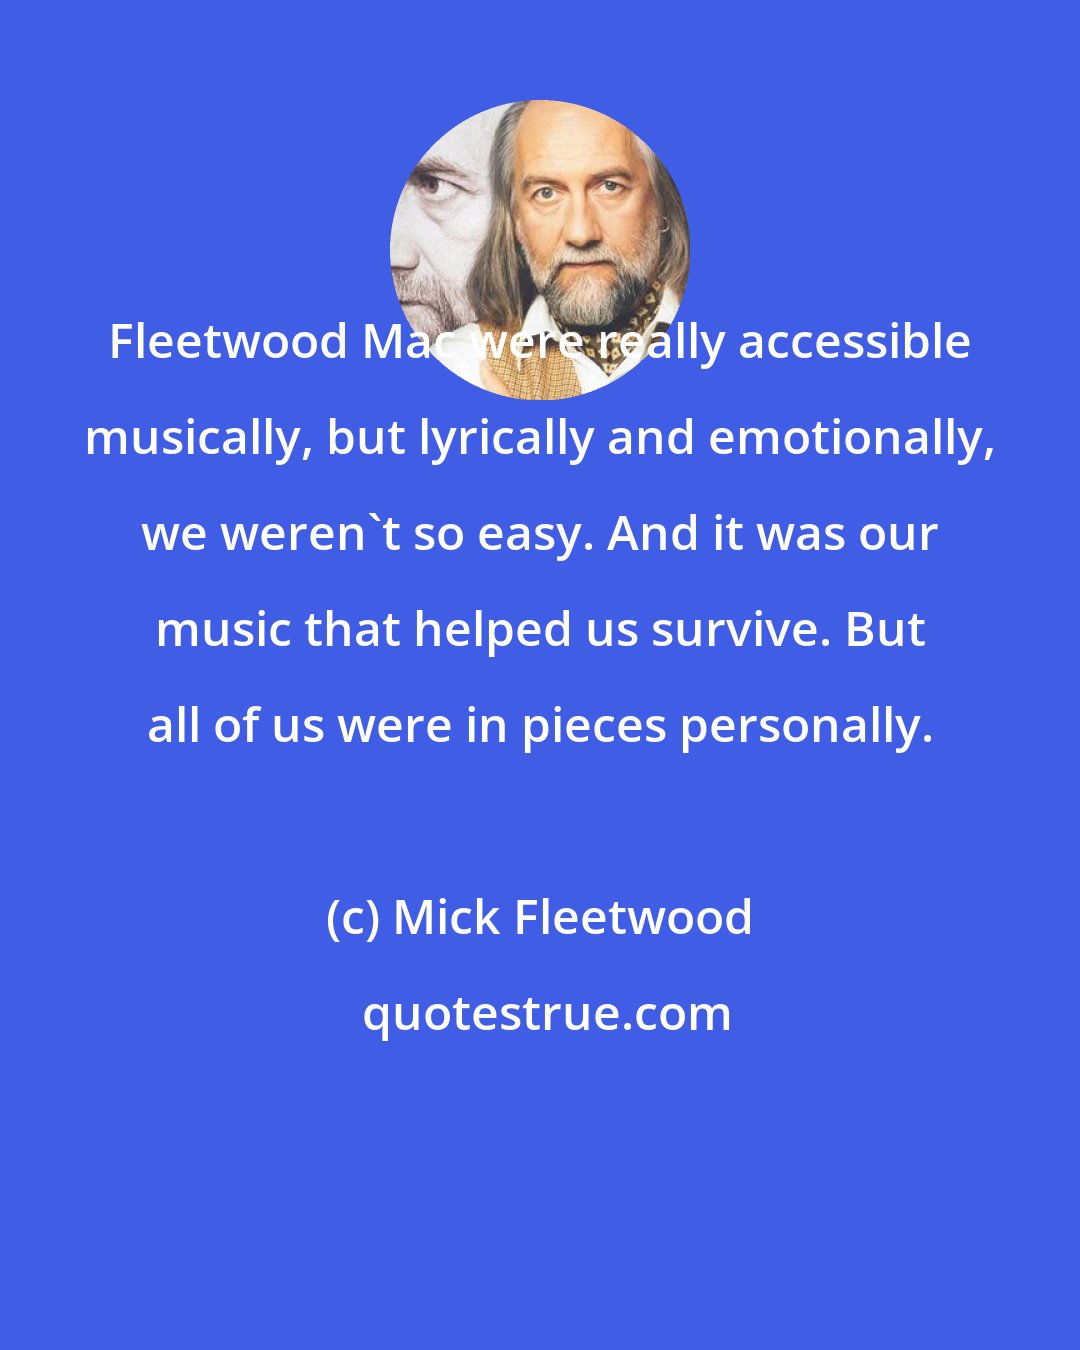 Mick Fleetwood: Fleetwood Mac were really accessible musically, but lyrically and emotionally, we weren't so easy. And it was our music that helped us survive. But all of us were in pieces personally.